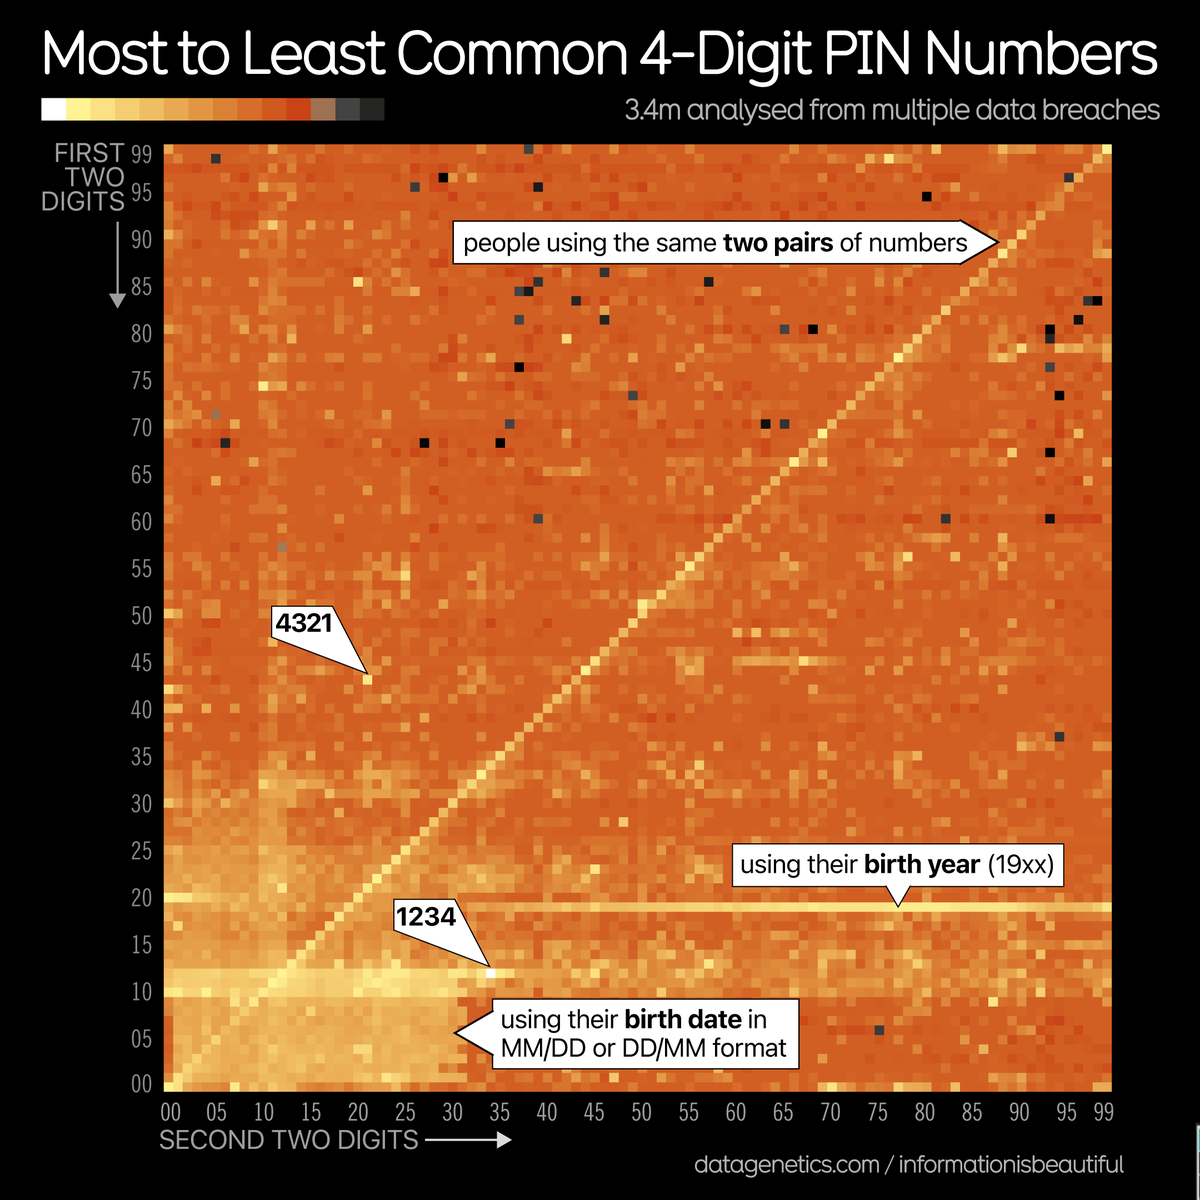 The most common 4-digit PINs from an analysis of 3.4 million leaked PINs. #dataviz source: reddit.com/r/dataisbeauti…